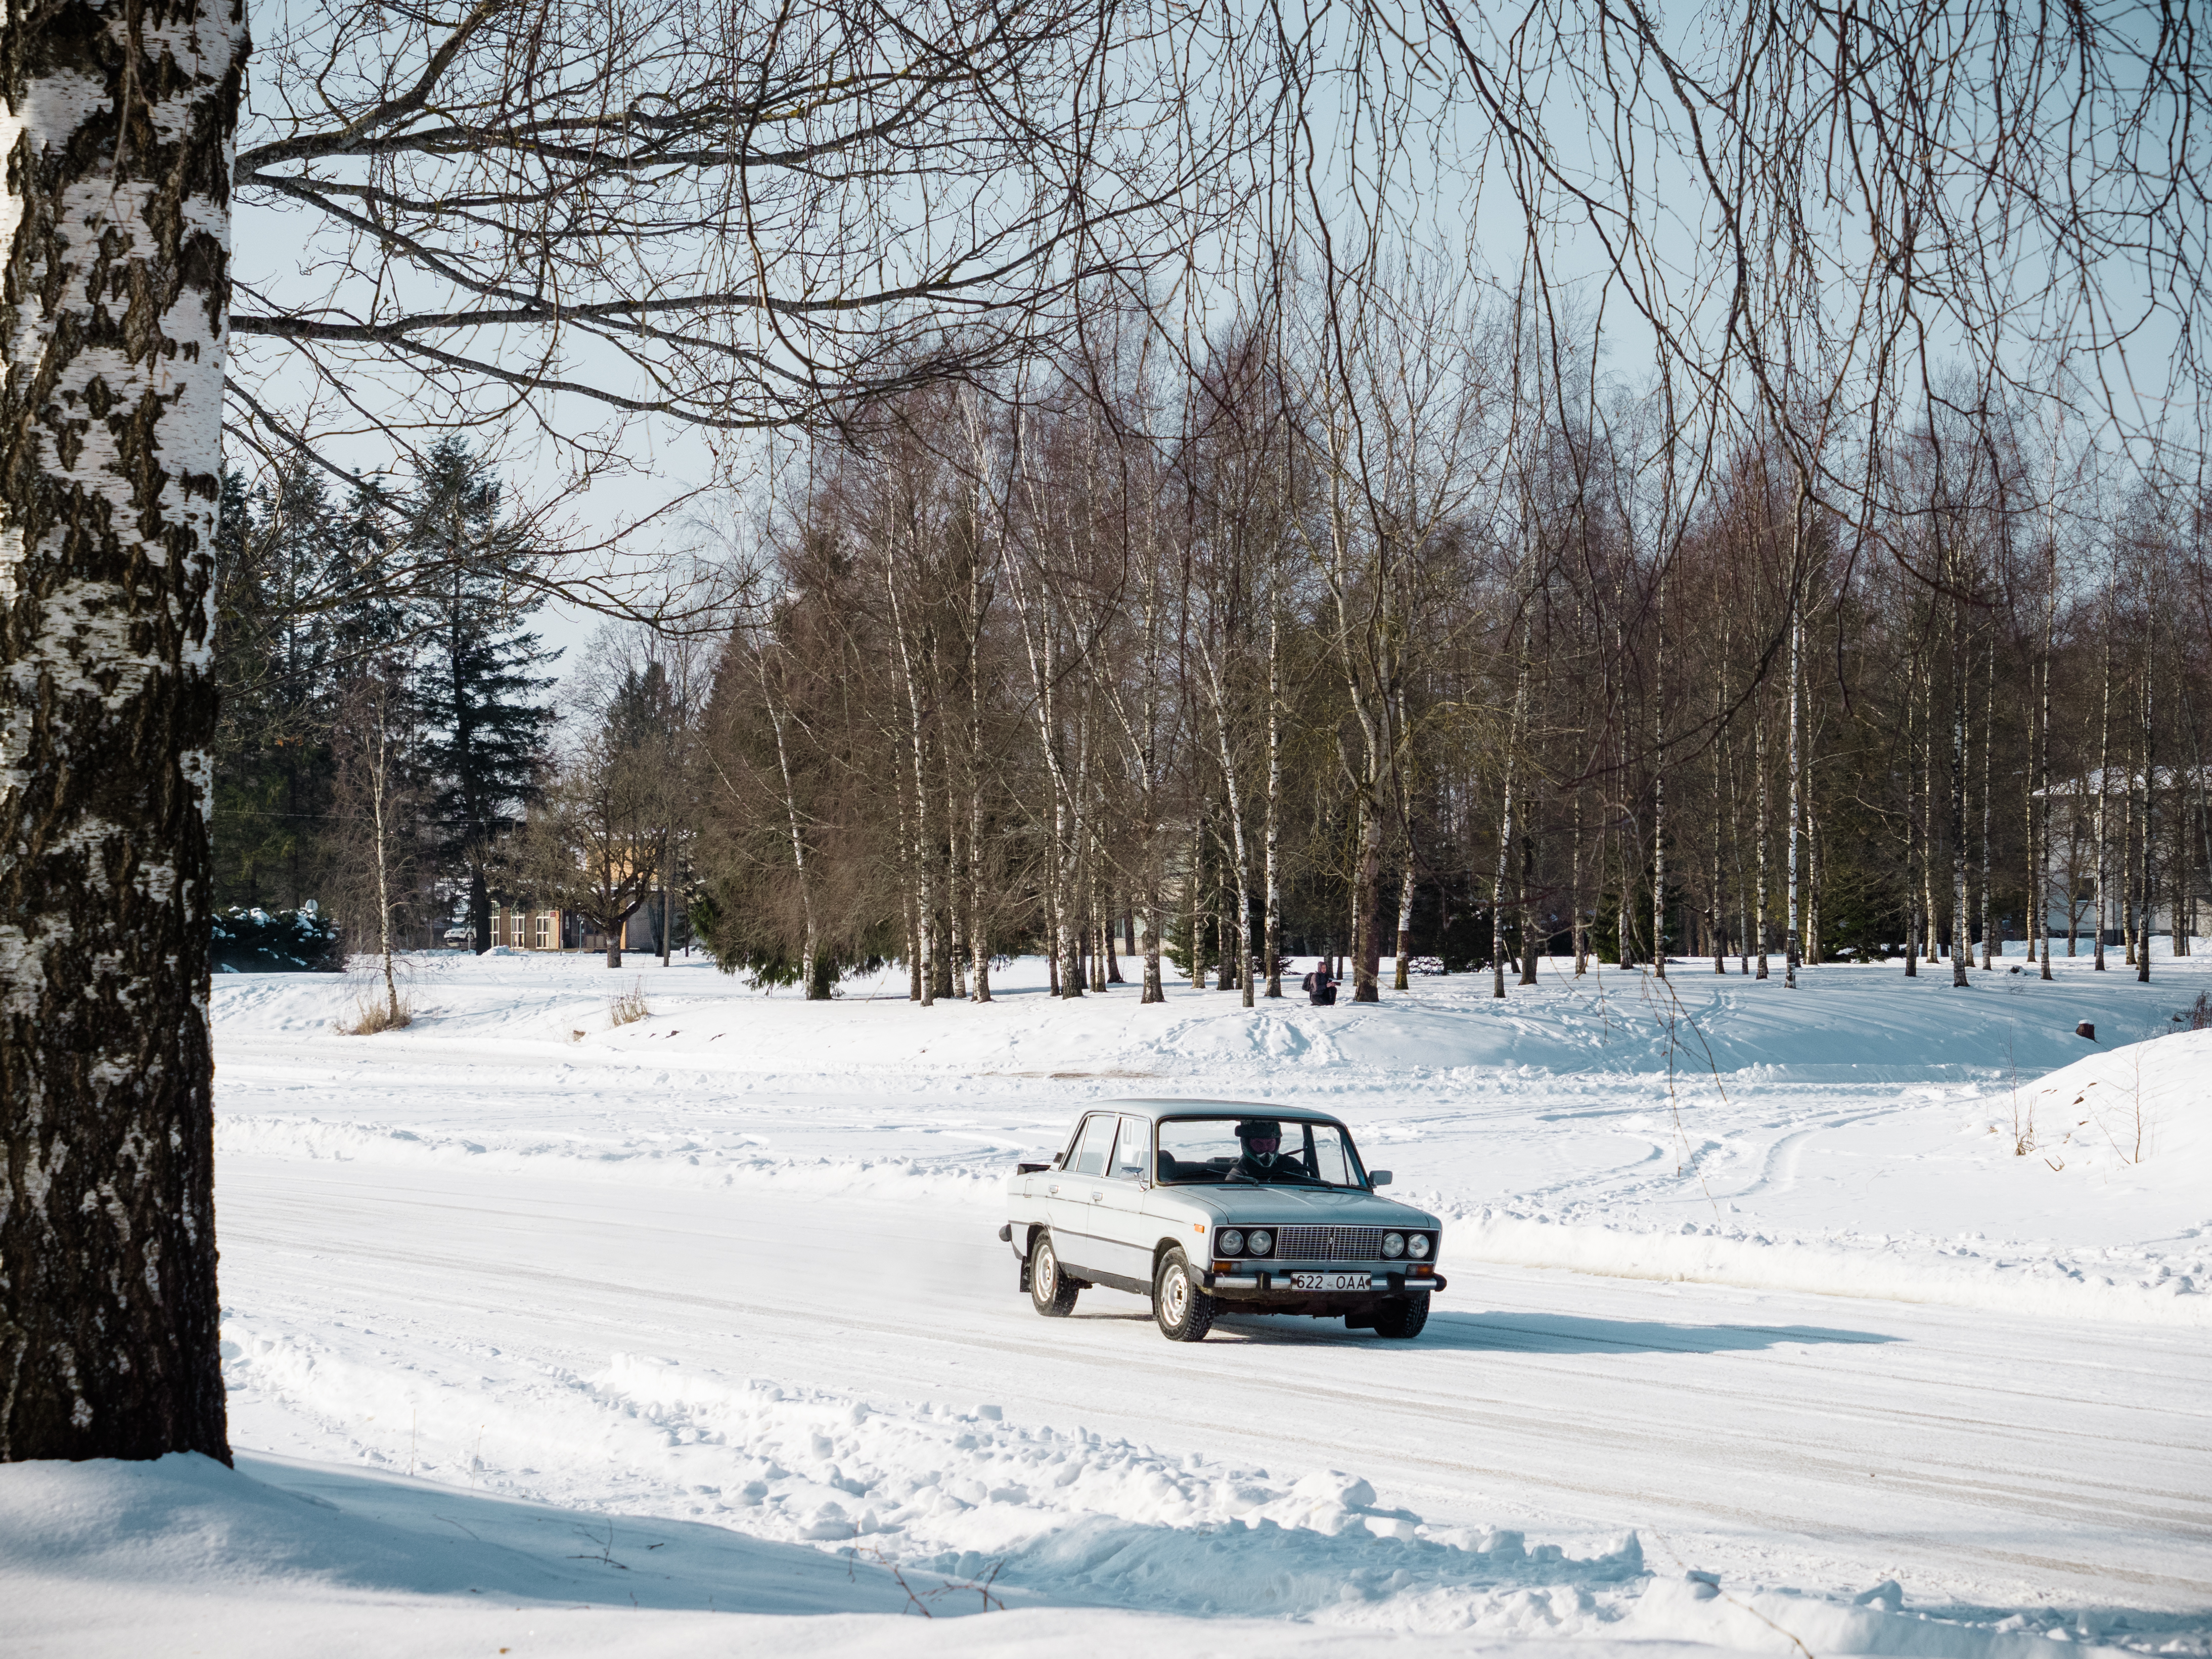 An old Soviet Lada racing on the ice.